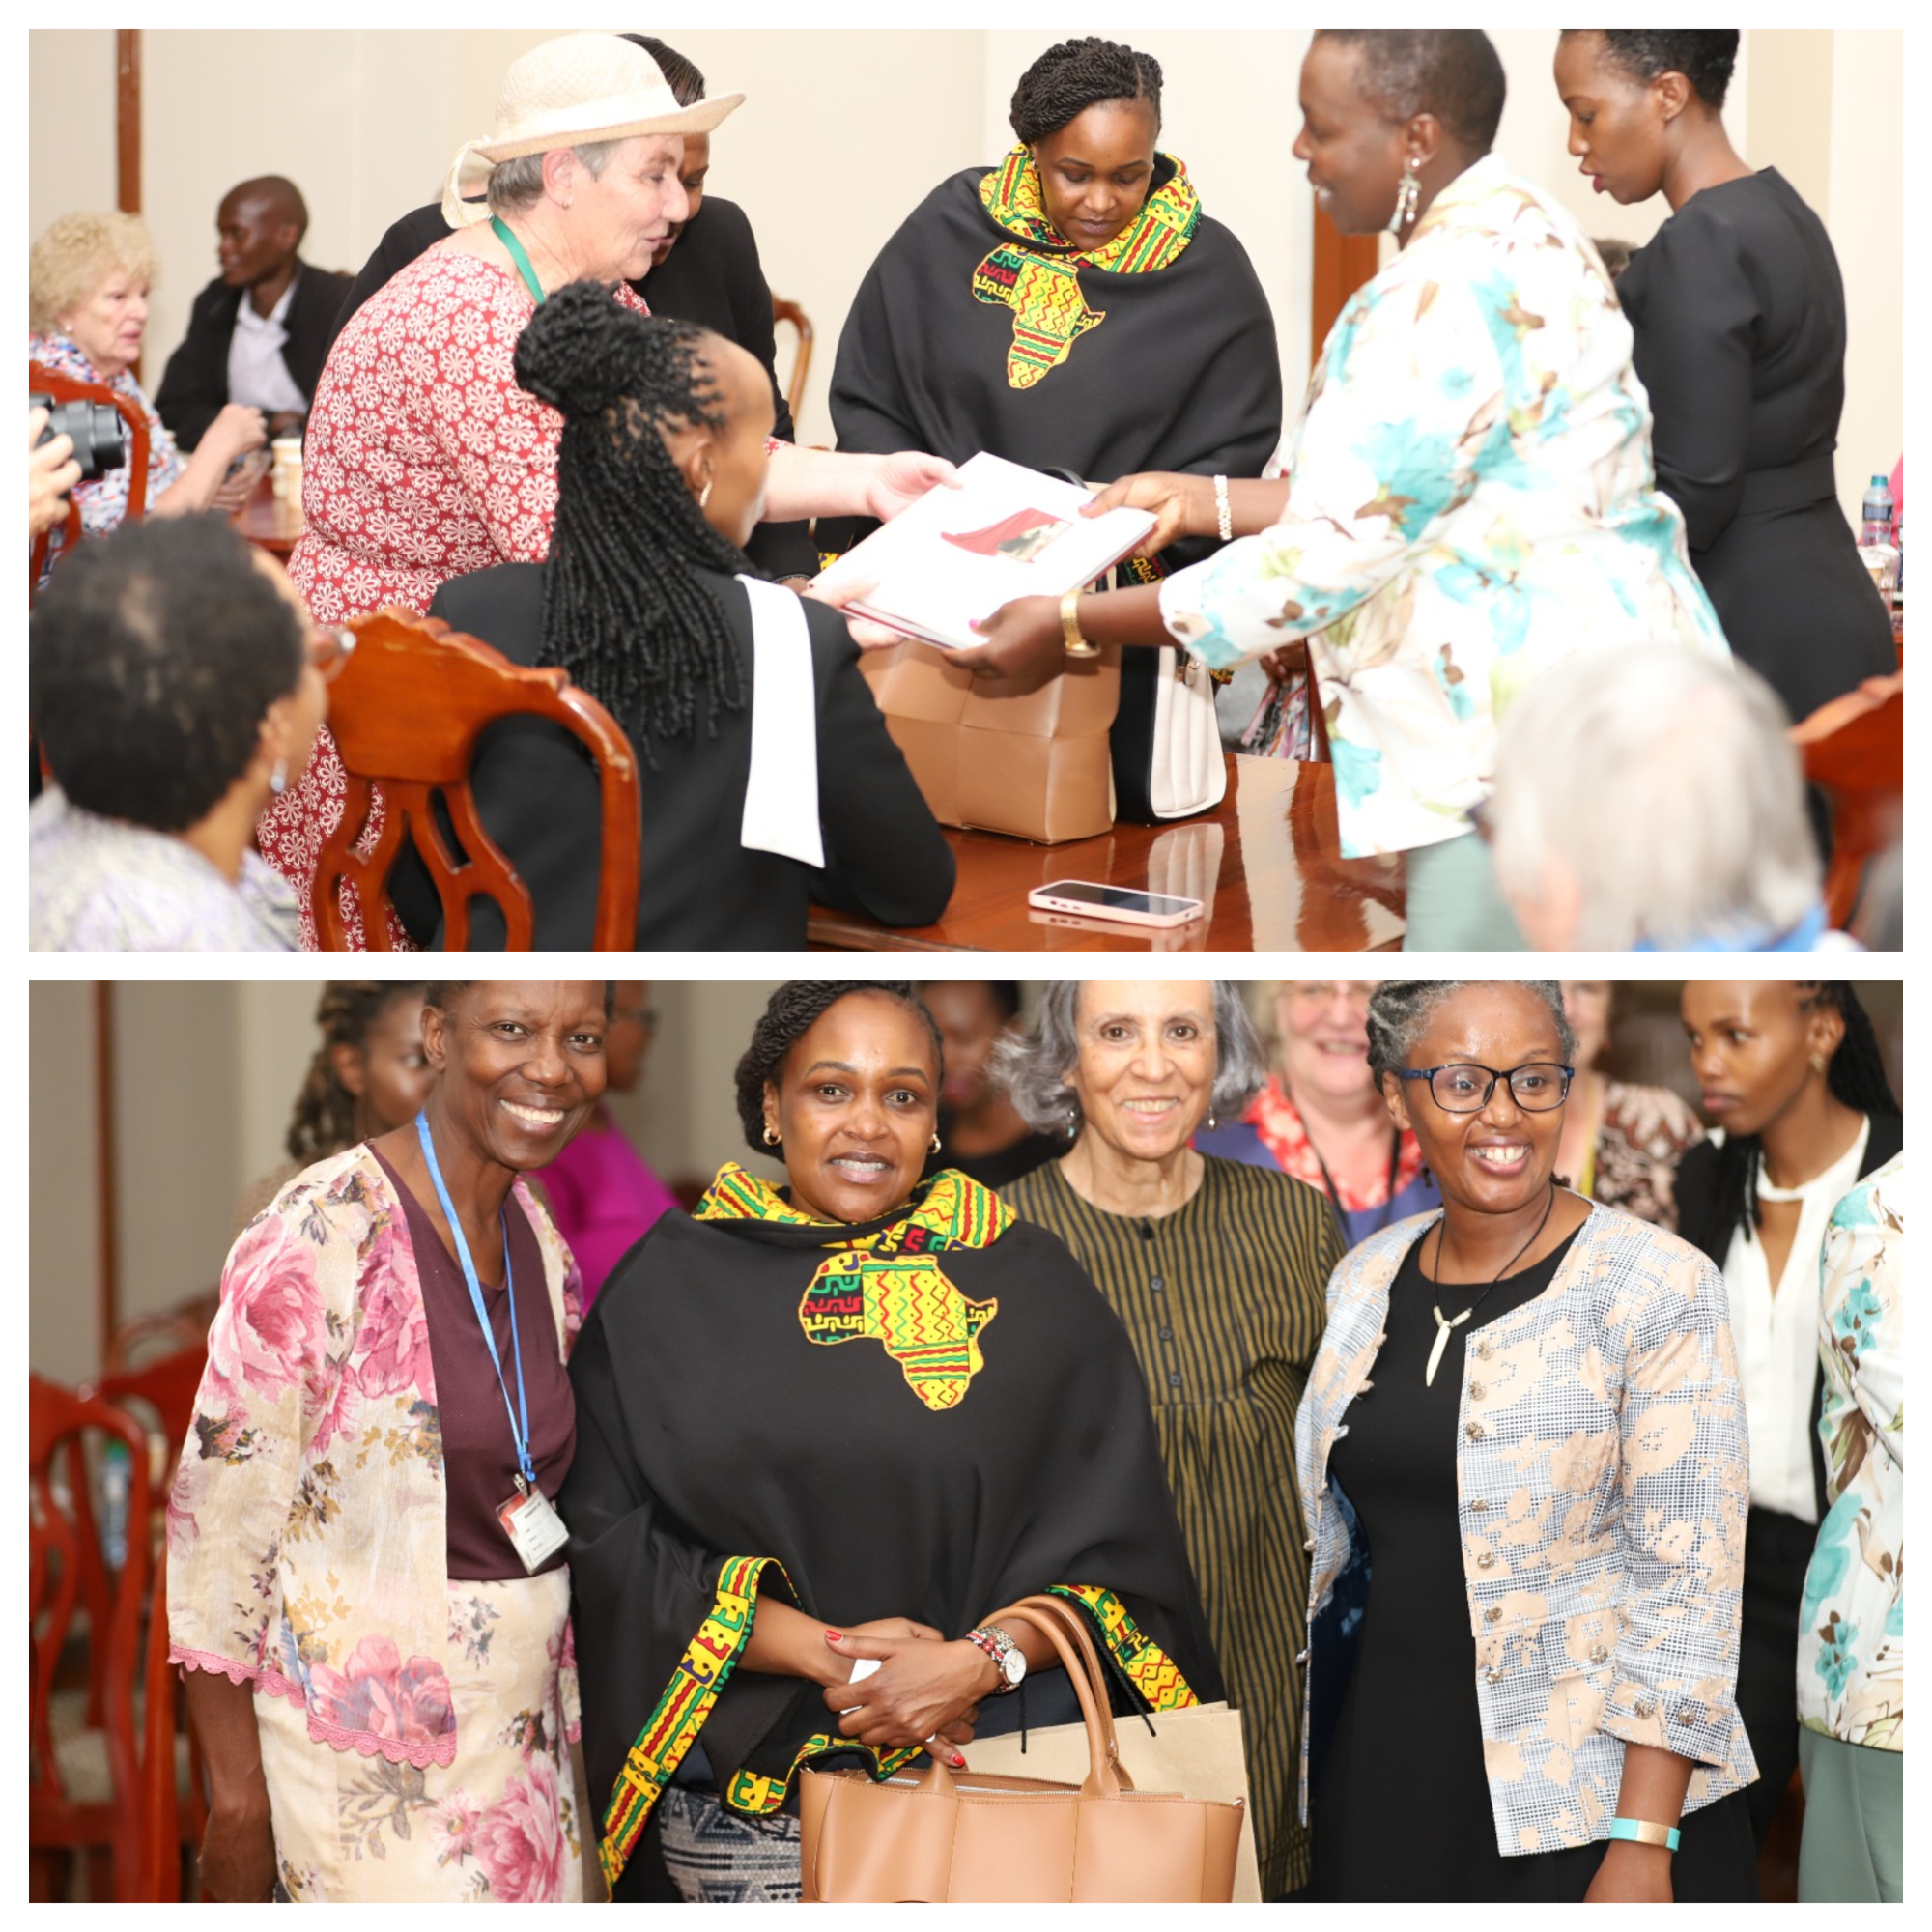 NATIONAL ASSEMBLY HOSTS THE EAST AFRICA WOMEN’S LEAGUE 